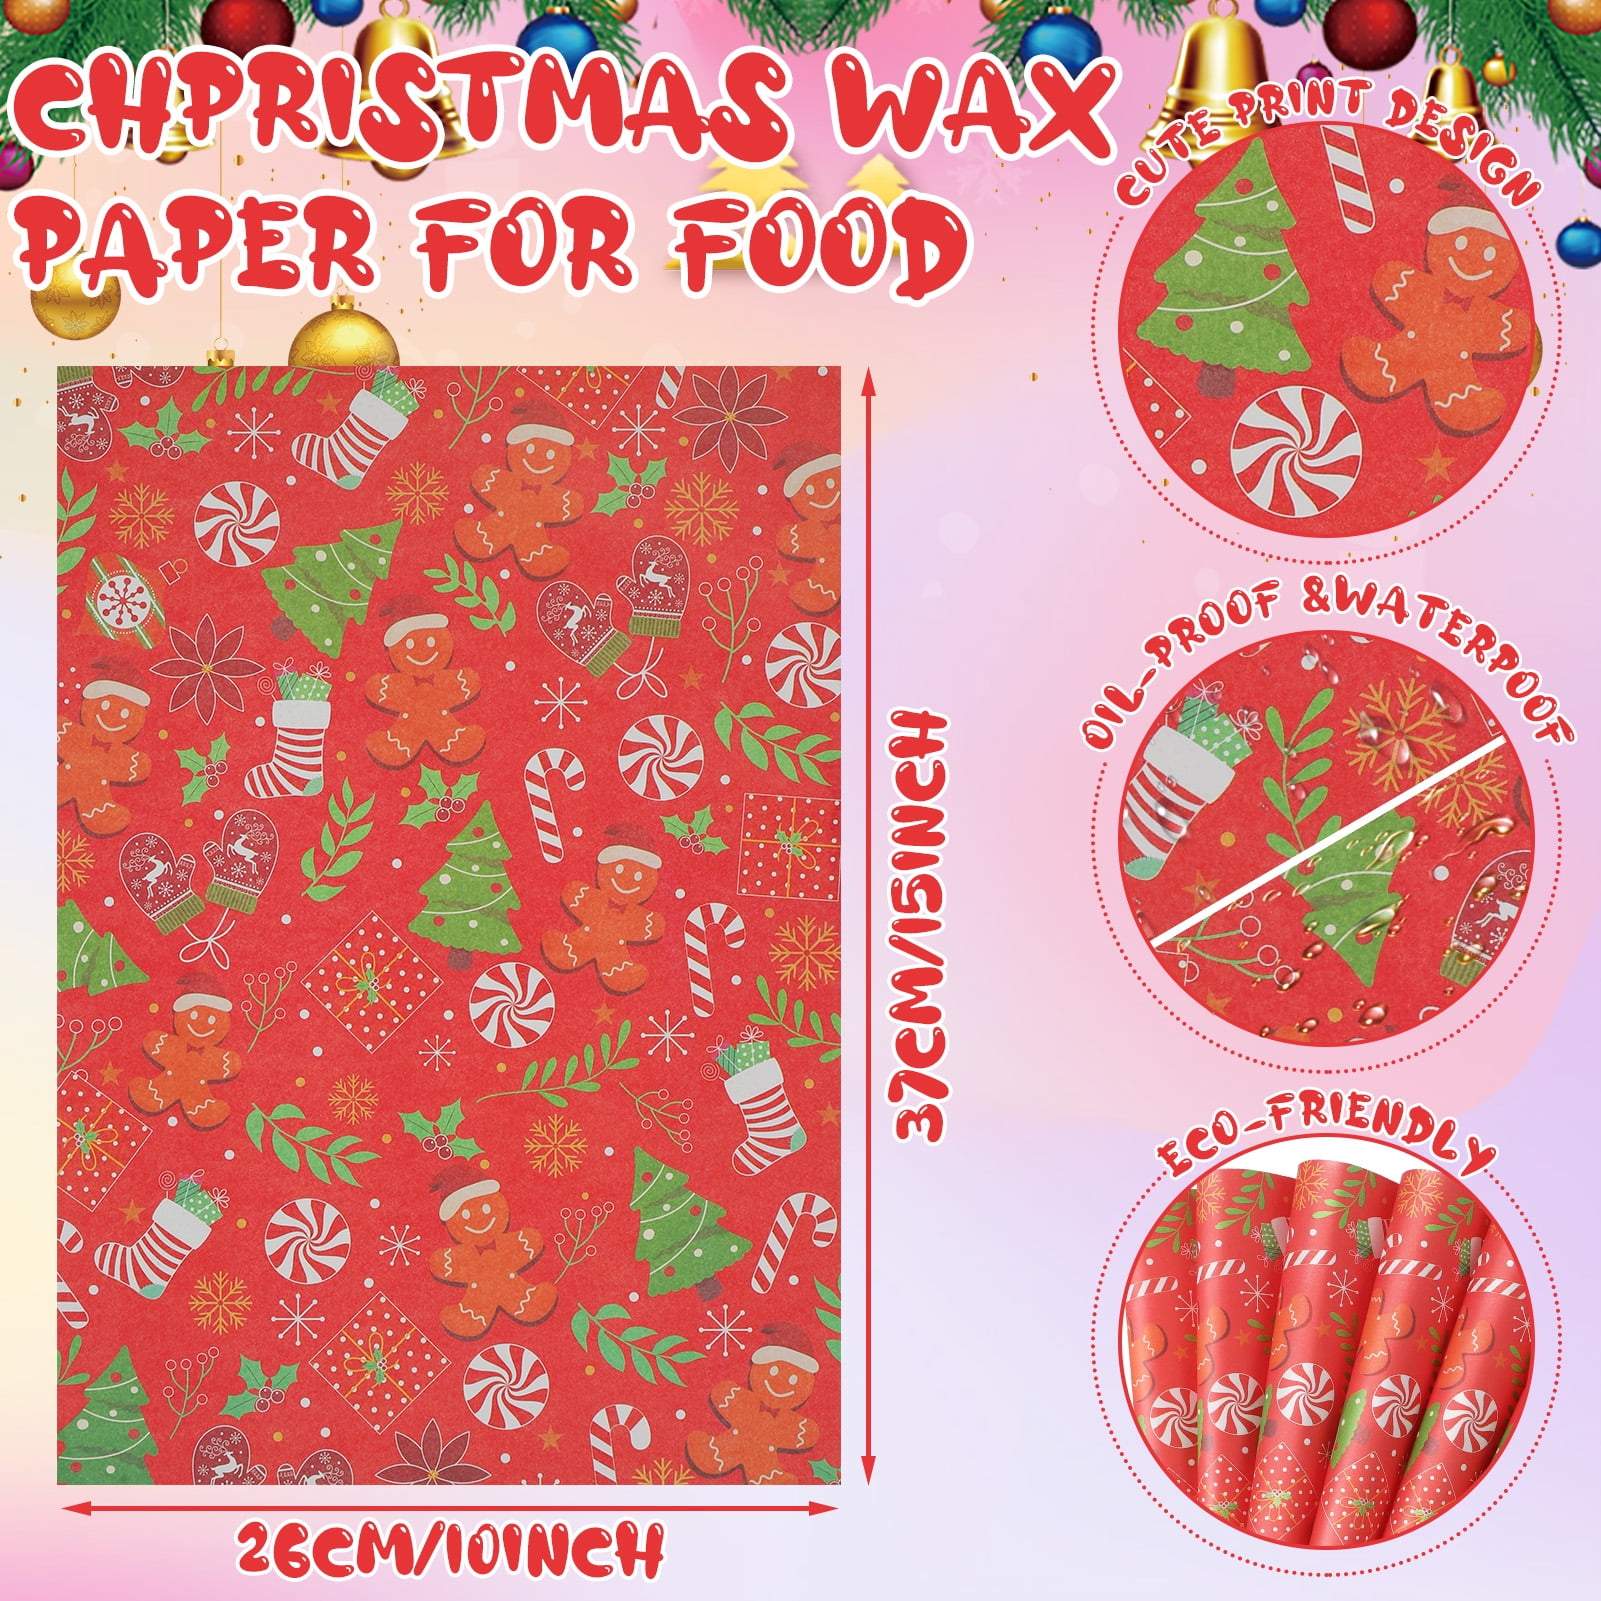  200 Pcs Christmas Wax Paper Sheets Sandwich Wrap Paper Elk  Snowflake Christmas Tree Chocolate Print Decorative Parchment Paper  Greaseproof Food Wrapping Basket Liners Deli Paper for Baking Cookie : Home  